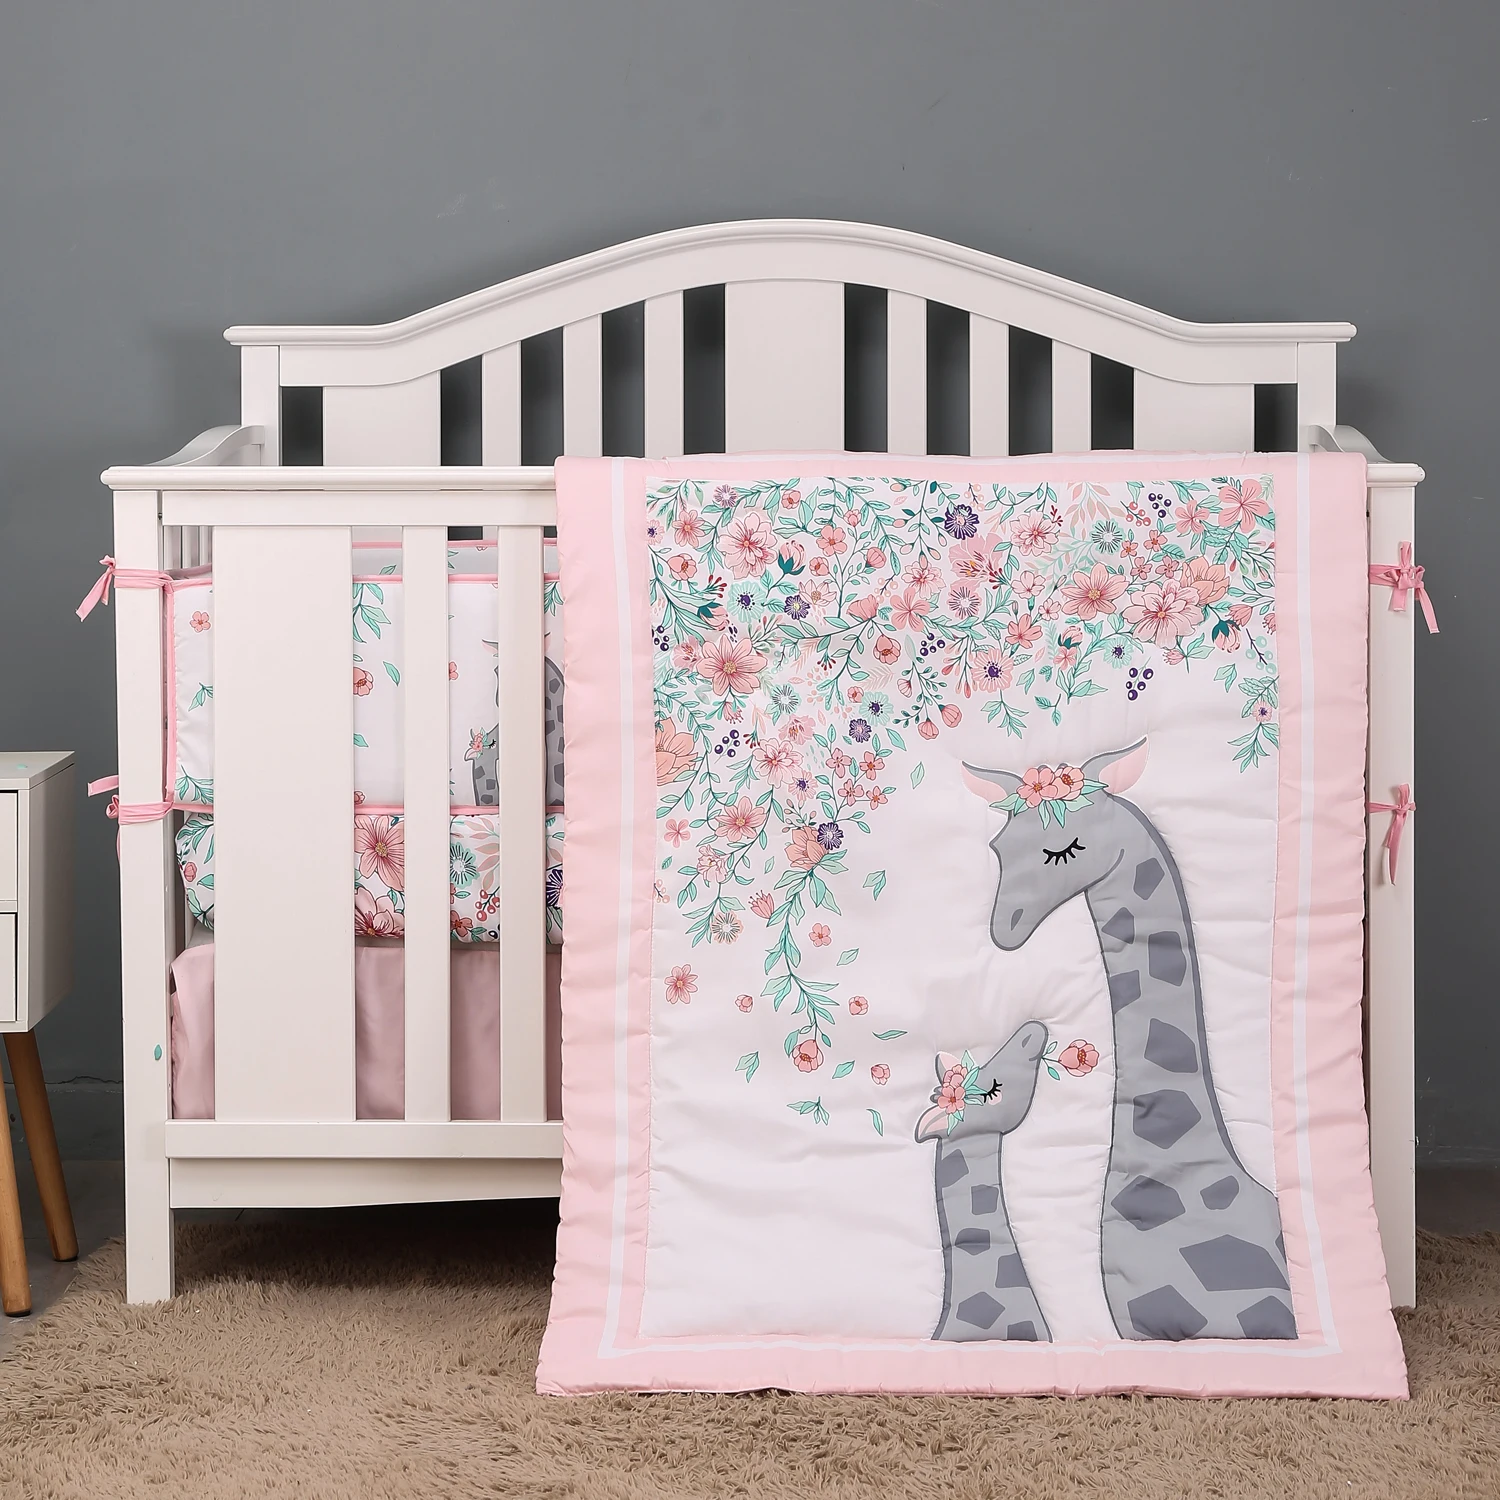 5 pcs Baby Crib Bedding Set for Girls hot sale including quilt, crib sheet, crib skirt,bumpers and pillow case